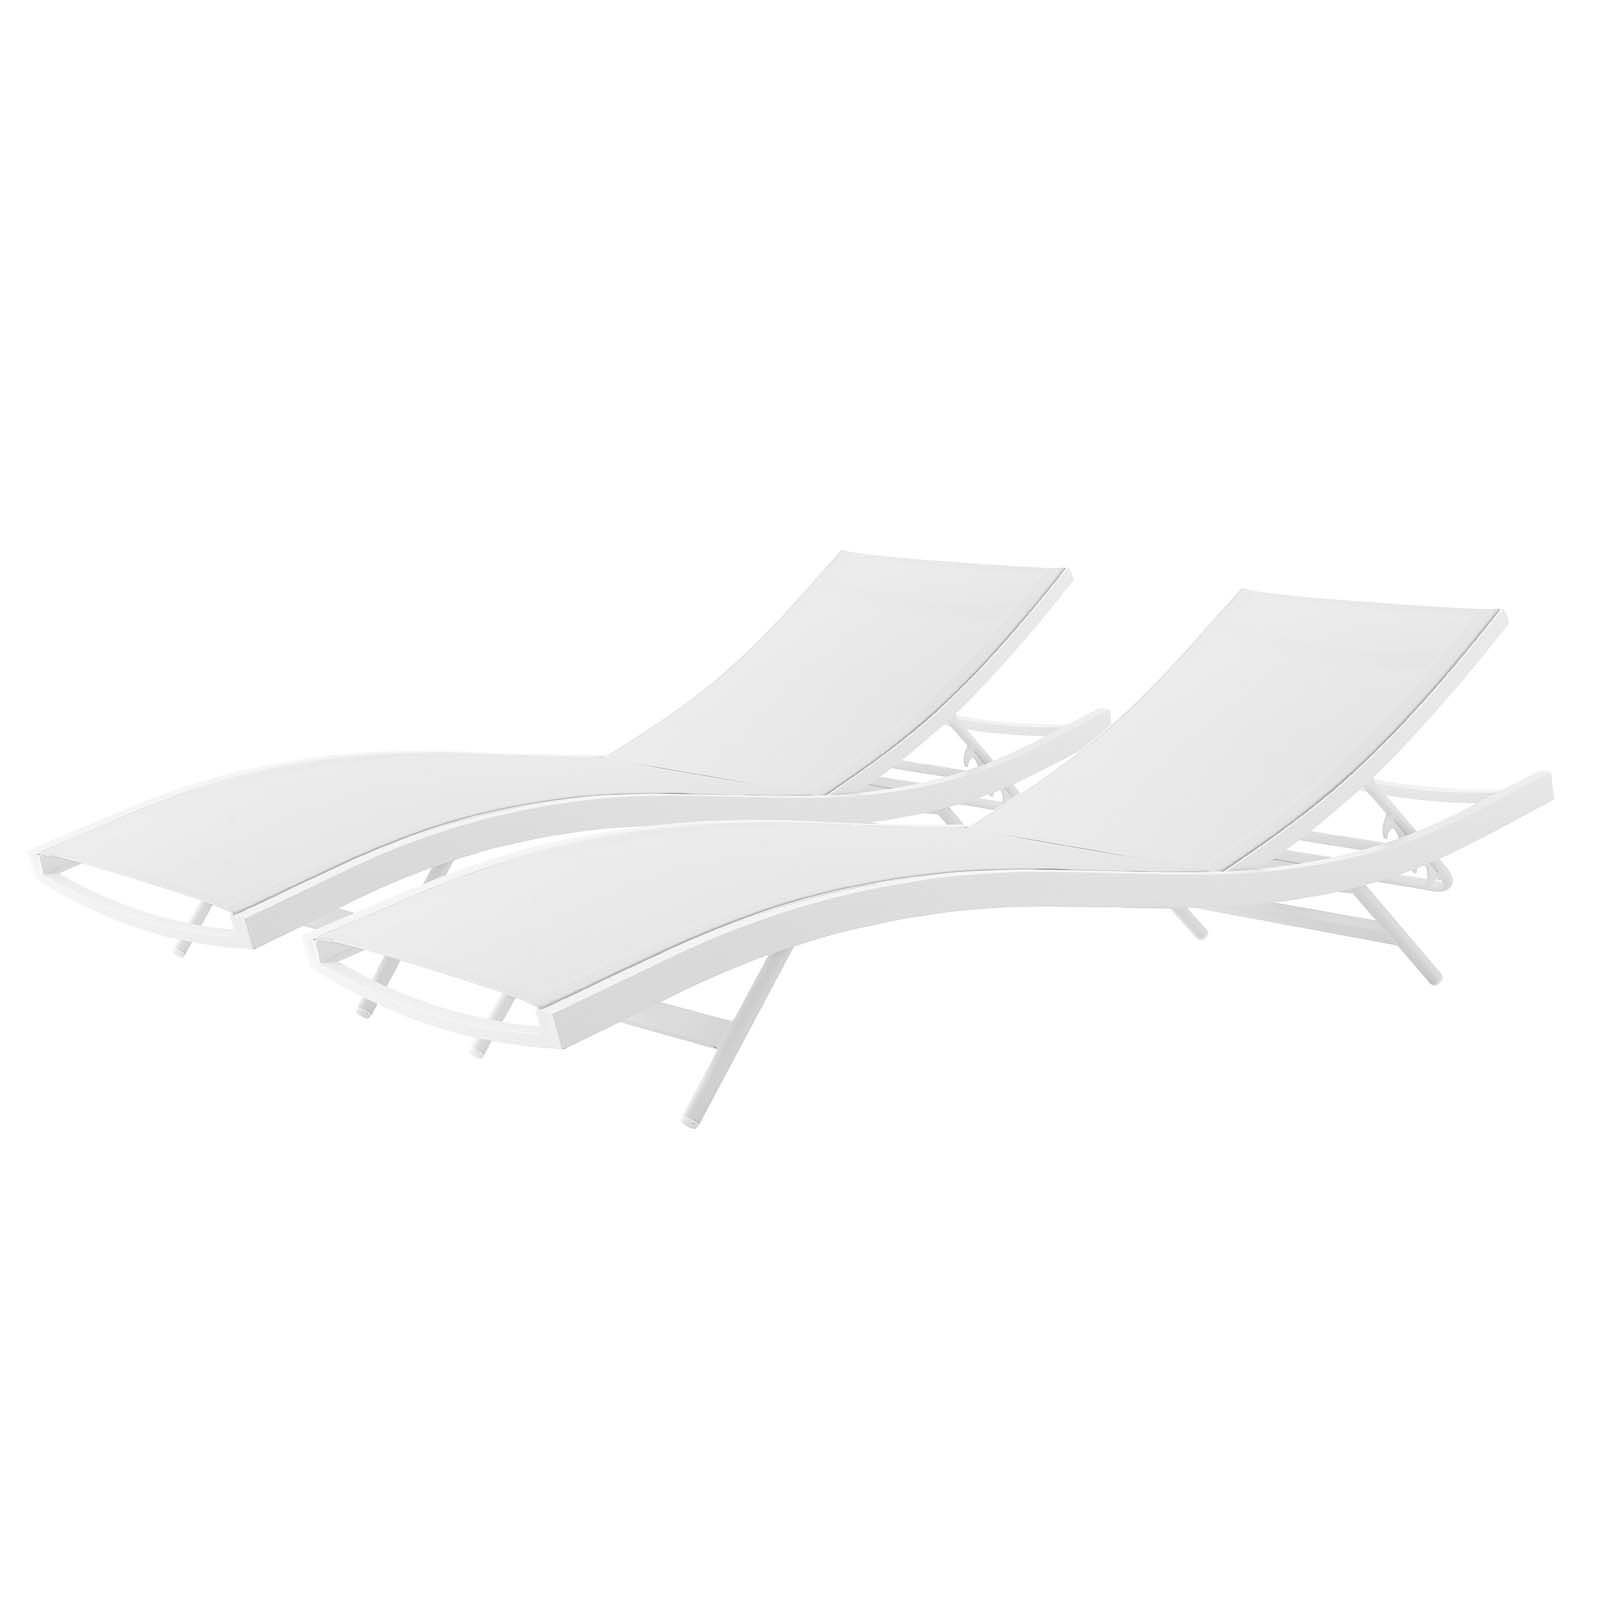 Well Liked White Fabric Outdoor Patio Sets Intended For Glimpse Outdoor Patio Mesh Chaise Lounge Set Of 2 White (View 10 of 15)